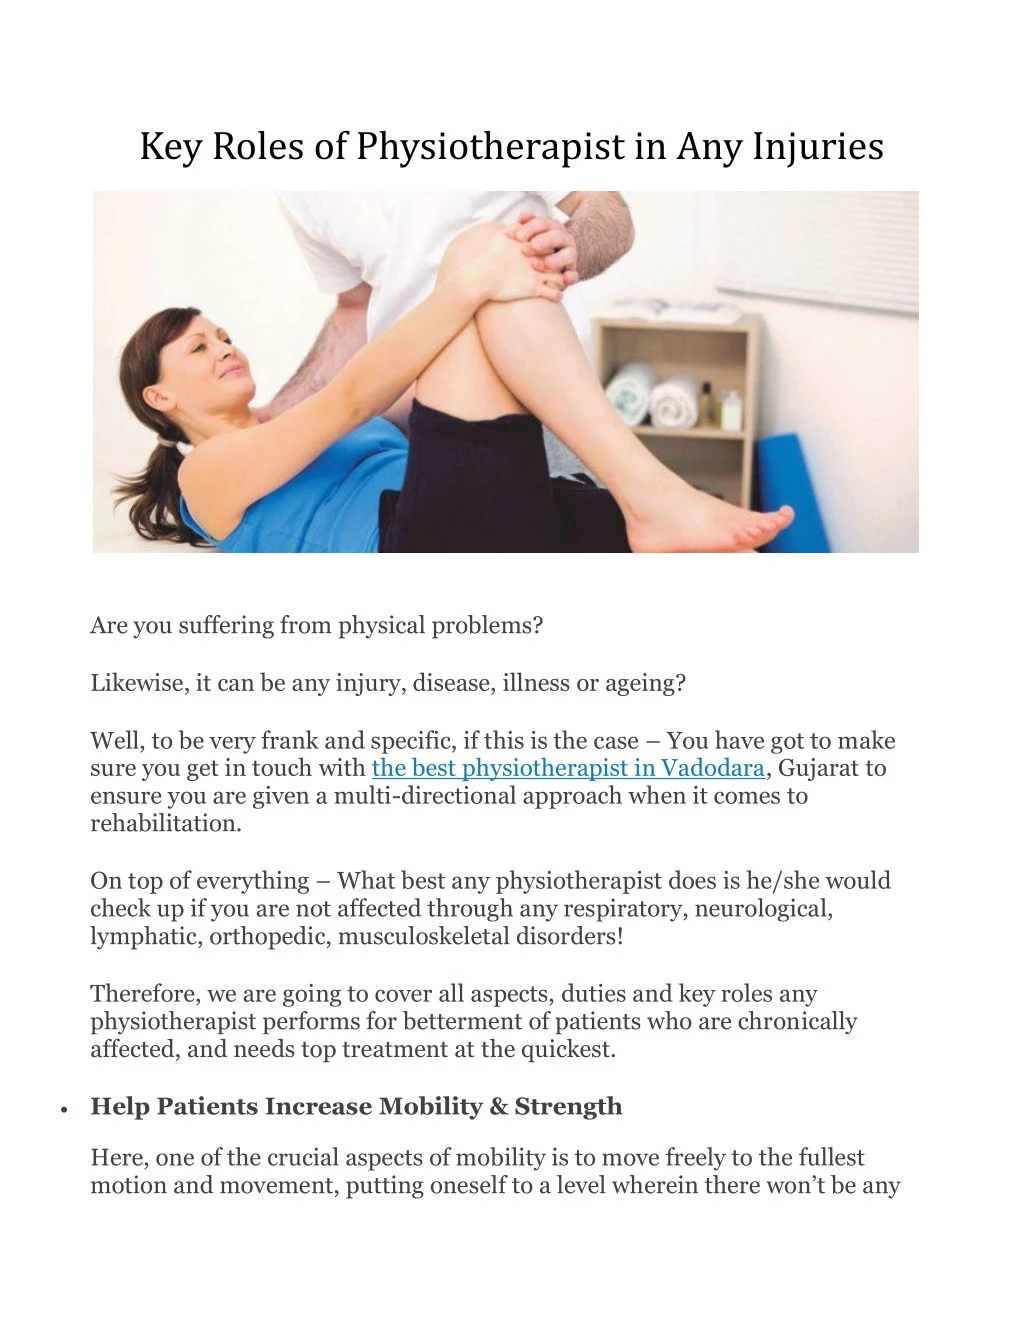 key roles of physiotherapist in any injuries